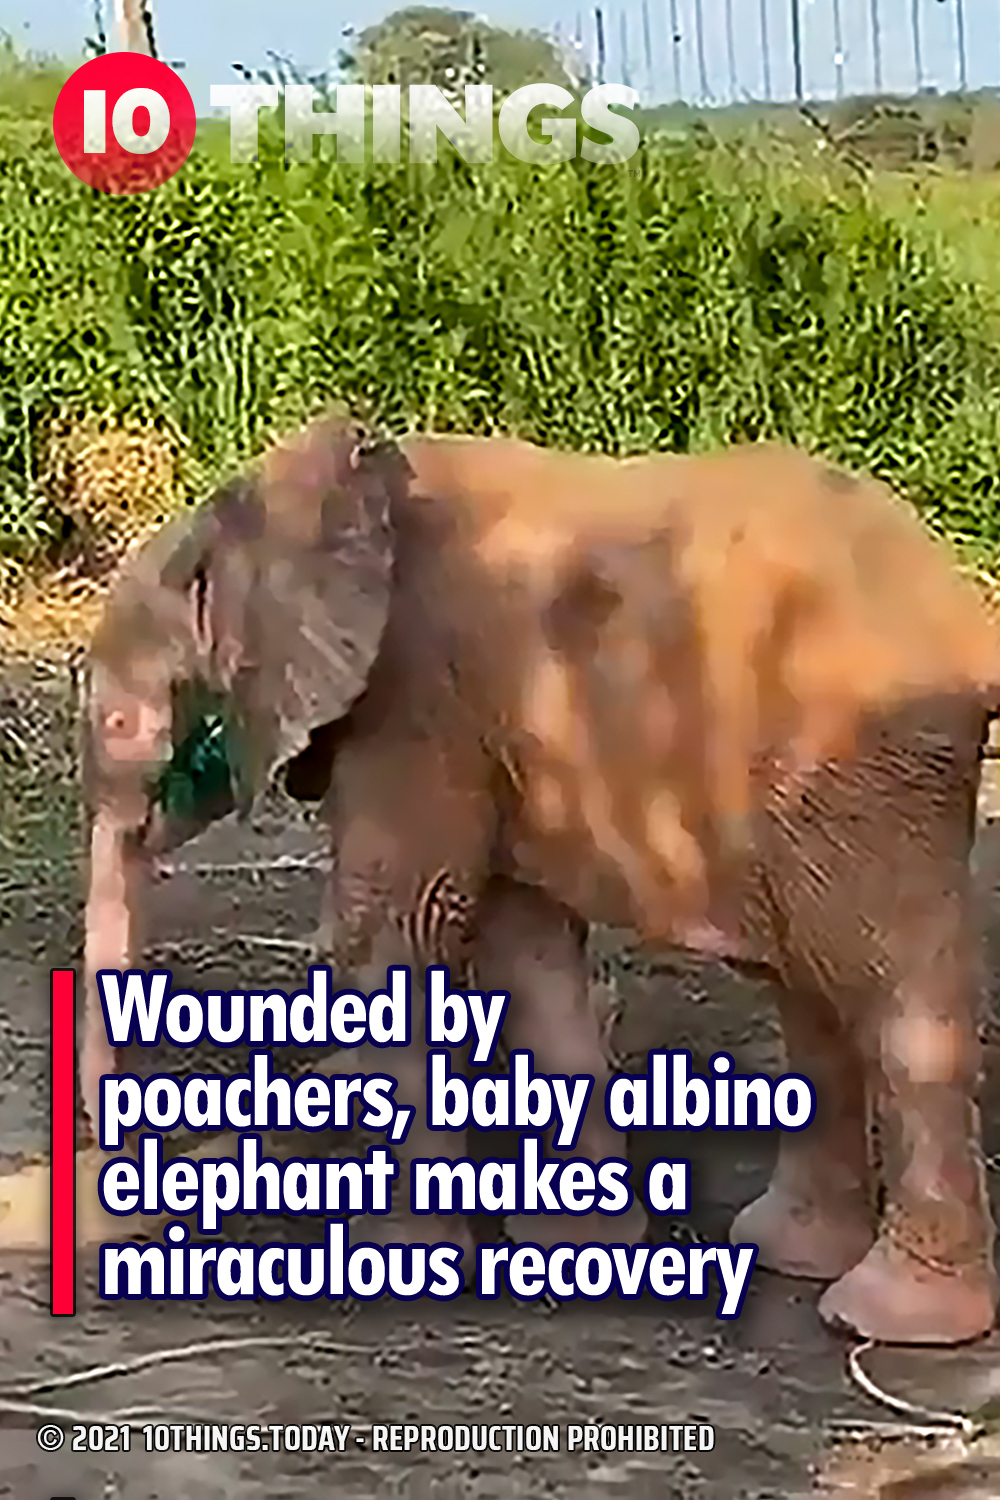 Wounded by poachers, baby albino elephant makes a miraculous recovery